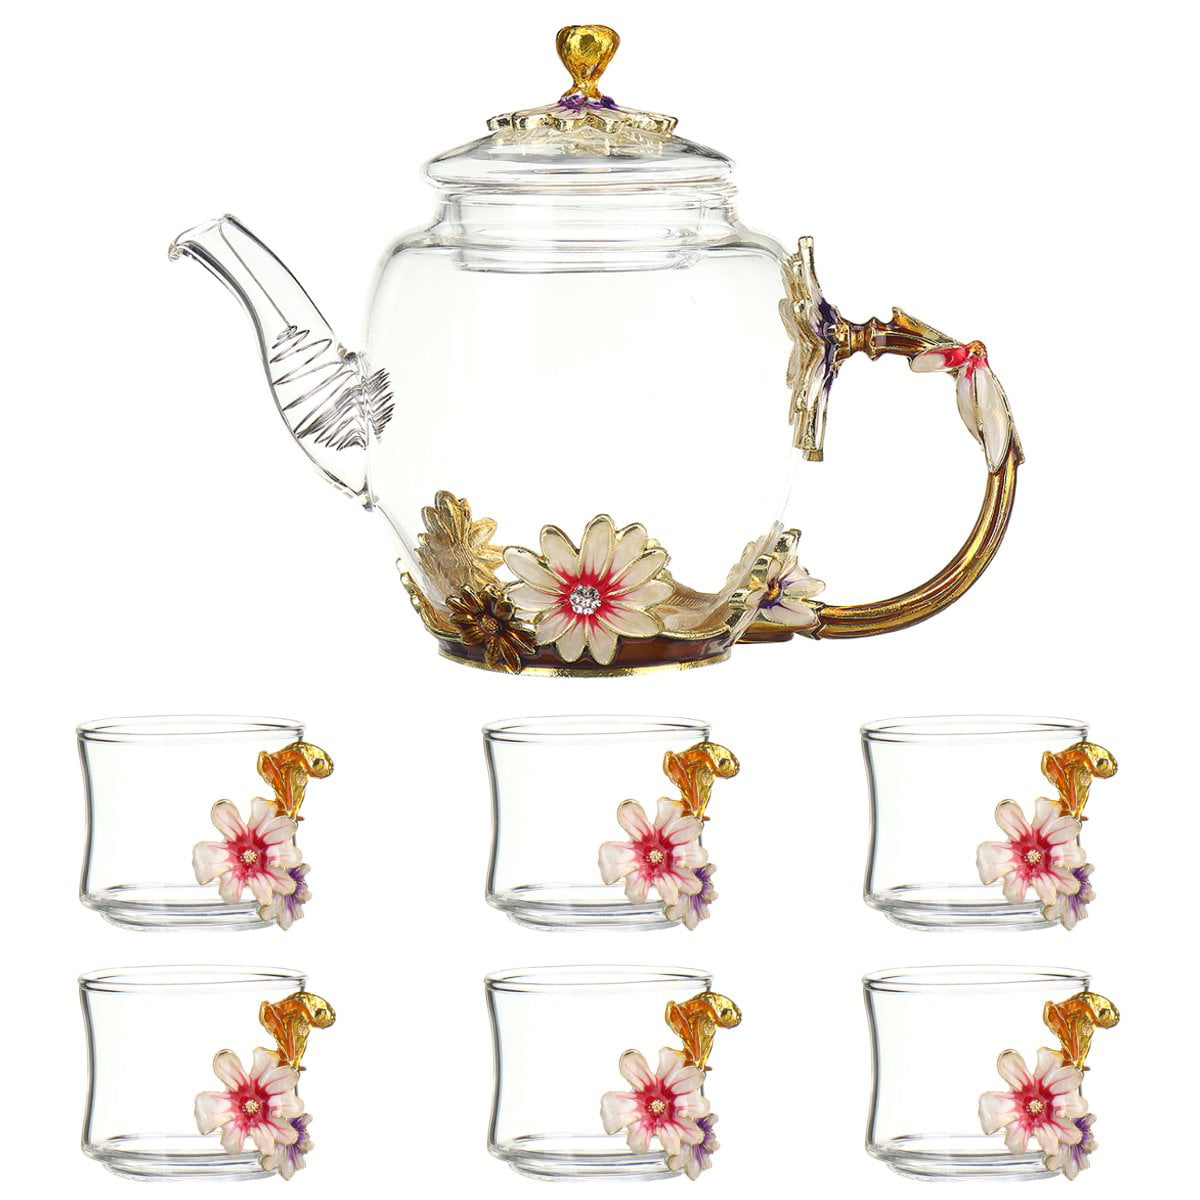 7Pcs Tea Set - Clear Heat Resistant Borosilicate Glass Teapot Tea Maker Set  and 6 Tea Cups Modern Serving Dishware, Home and Party Use,  Business/Christmas/Birthday Gifts 